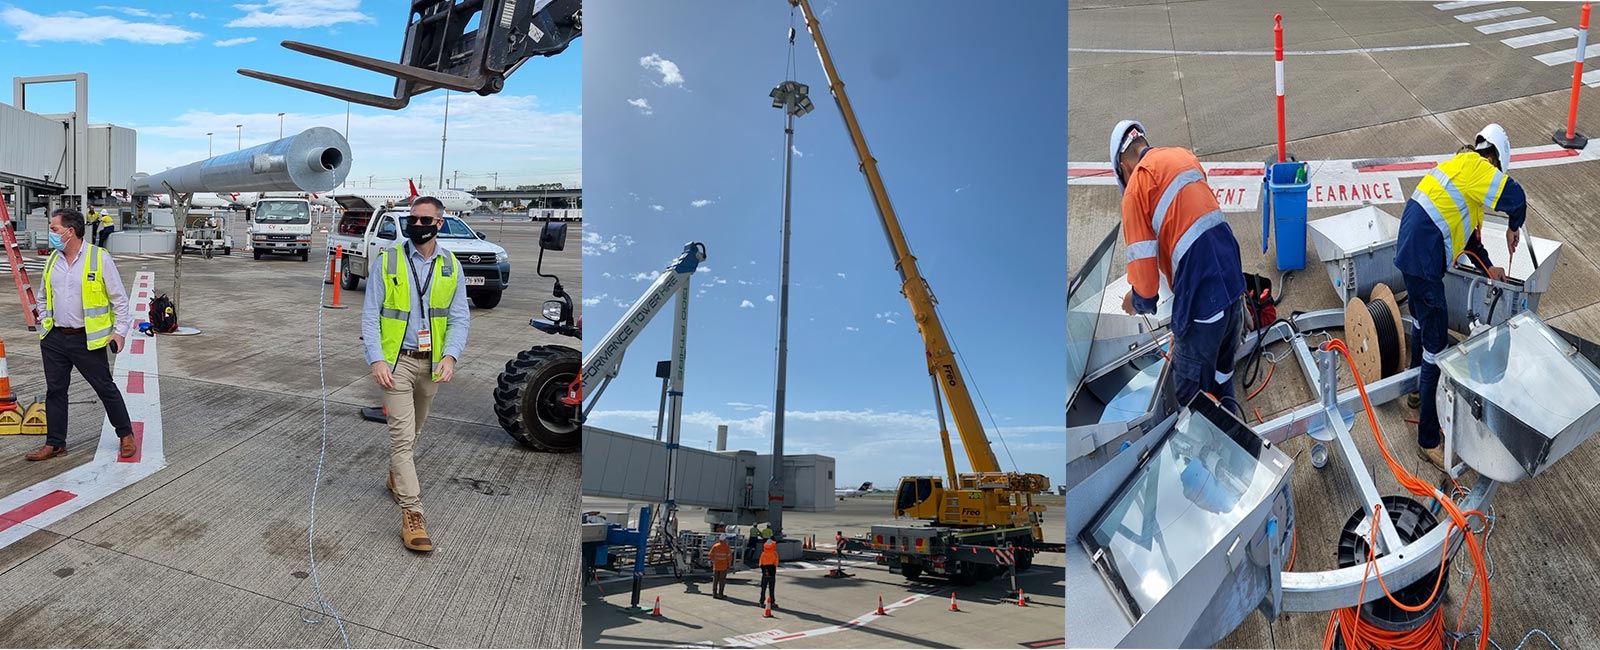 Apron Lighting Upgrade Project at Brisbane Airport